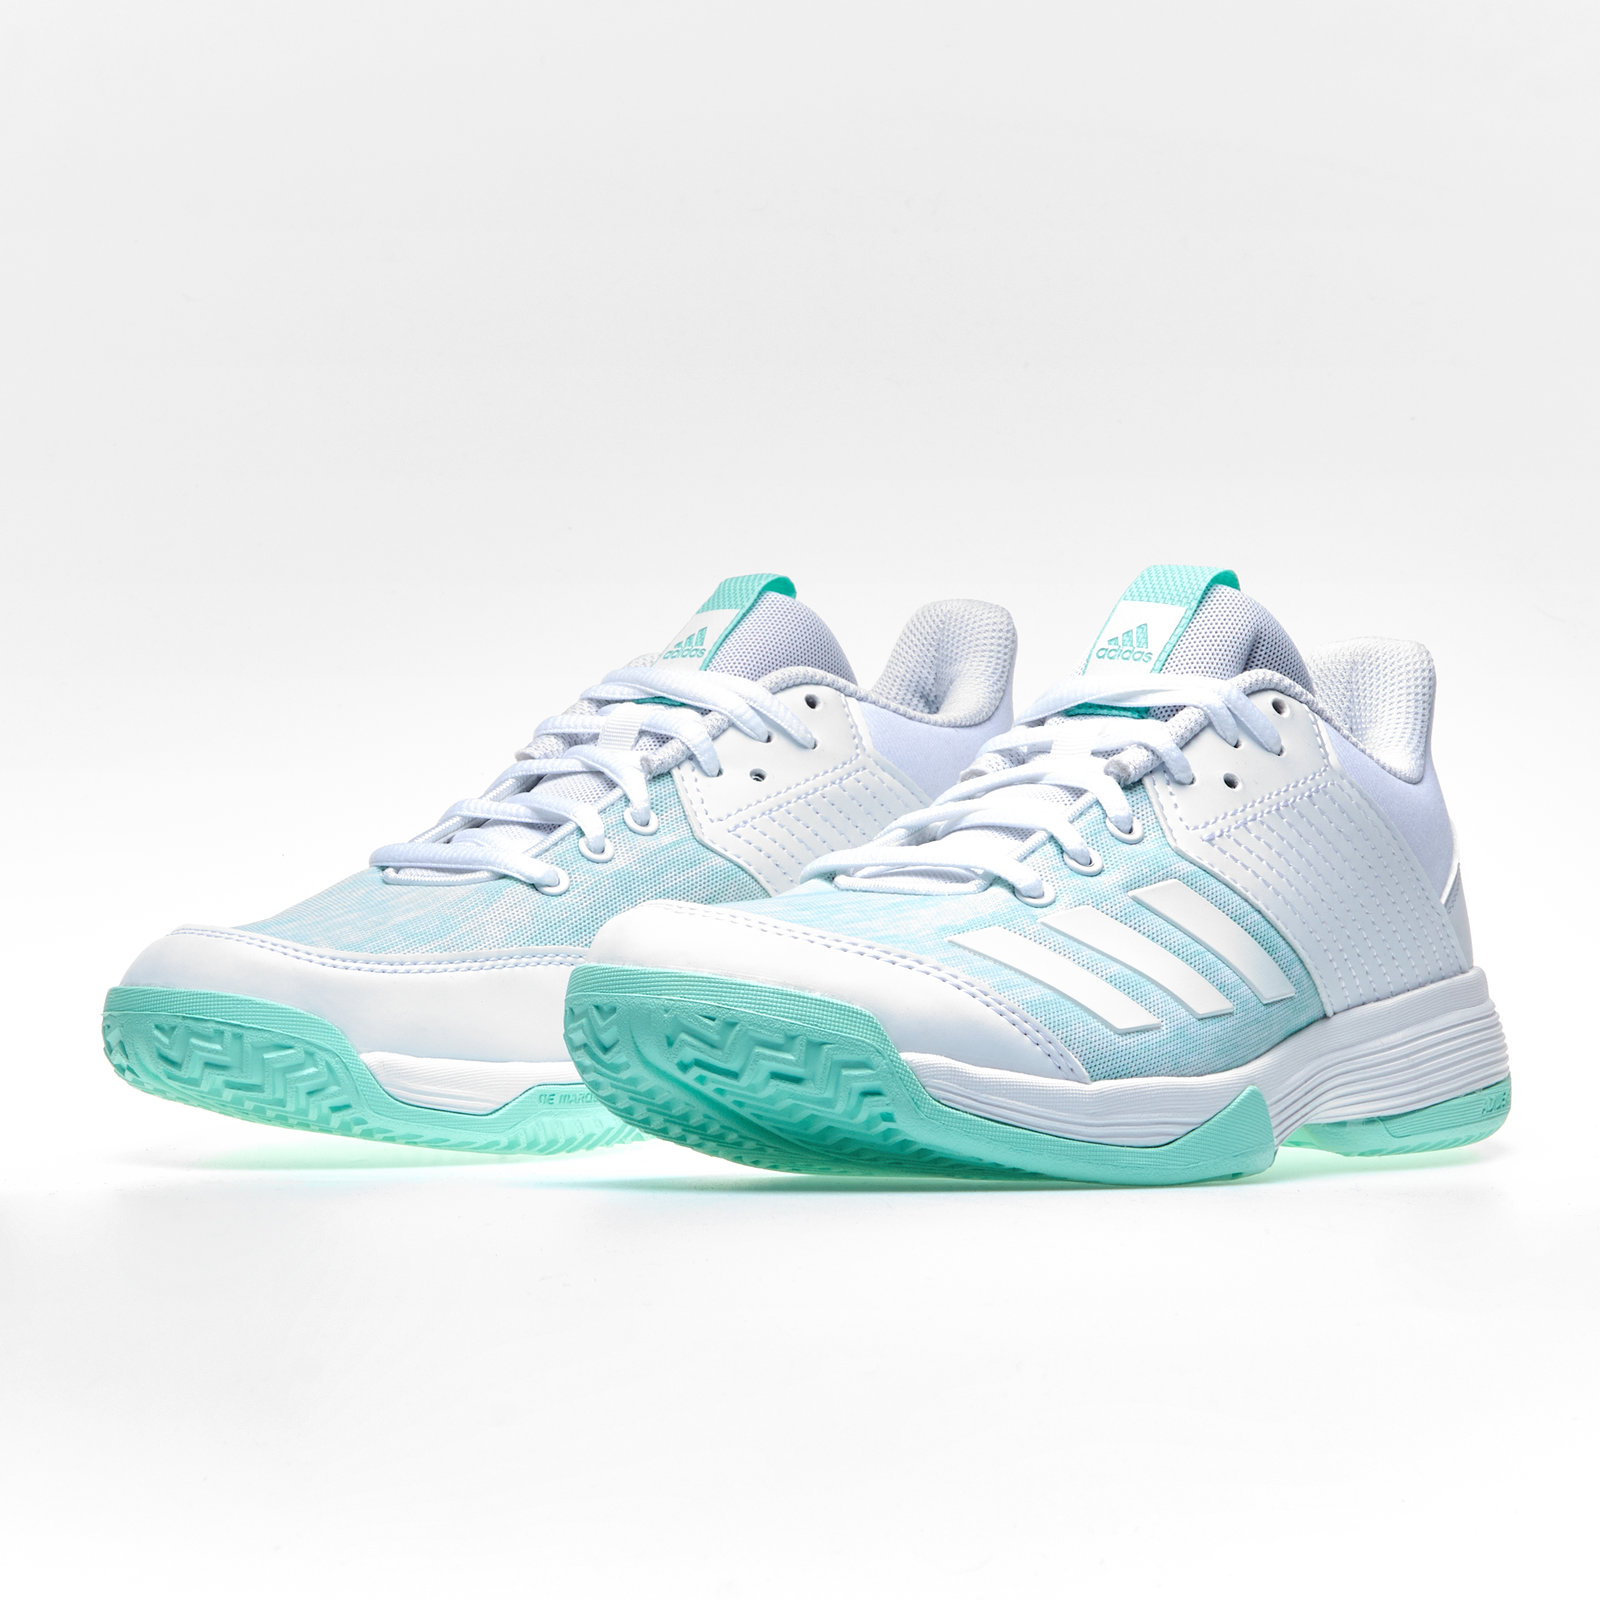 42 Top Adidas netball shoes australia in Style